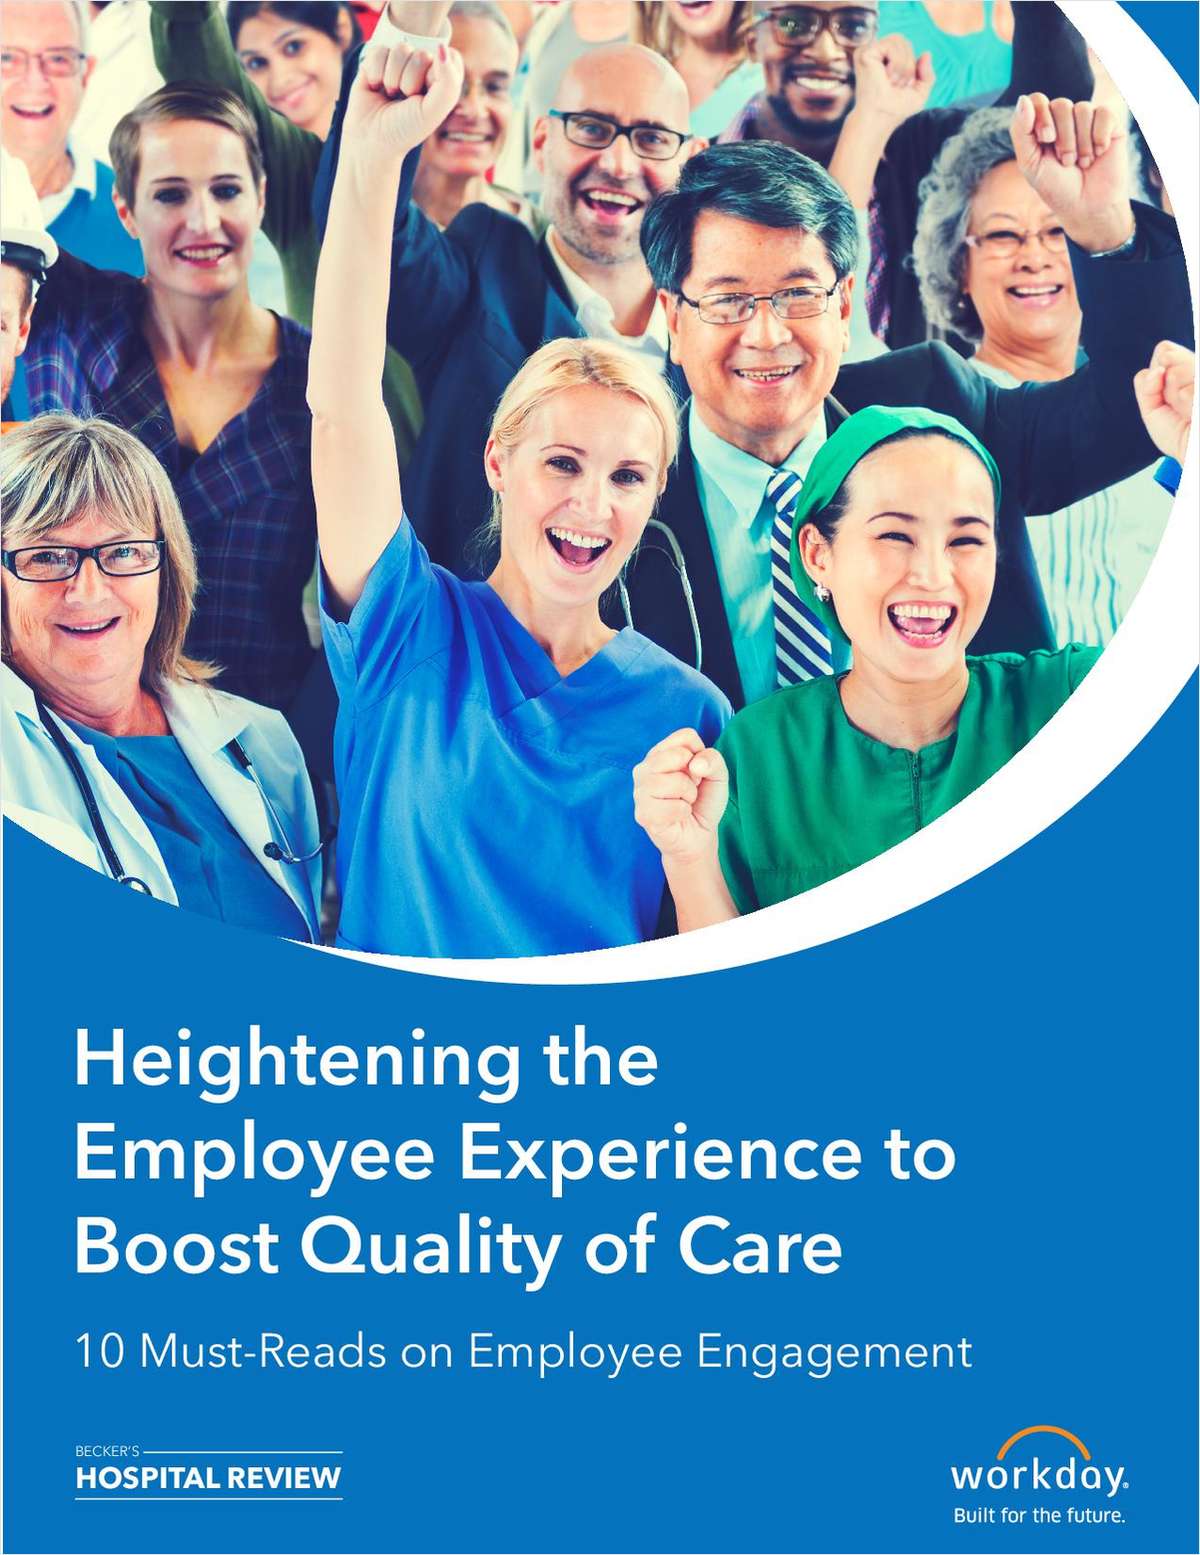 Heightening the Employee Experience to Boost Quality of Care